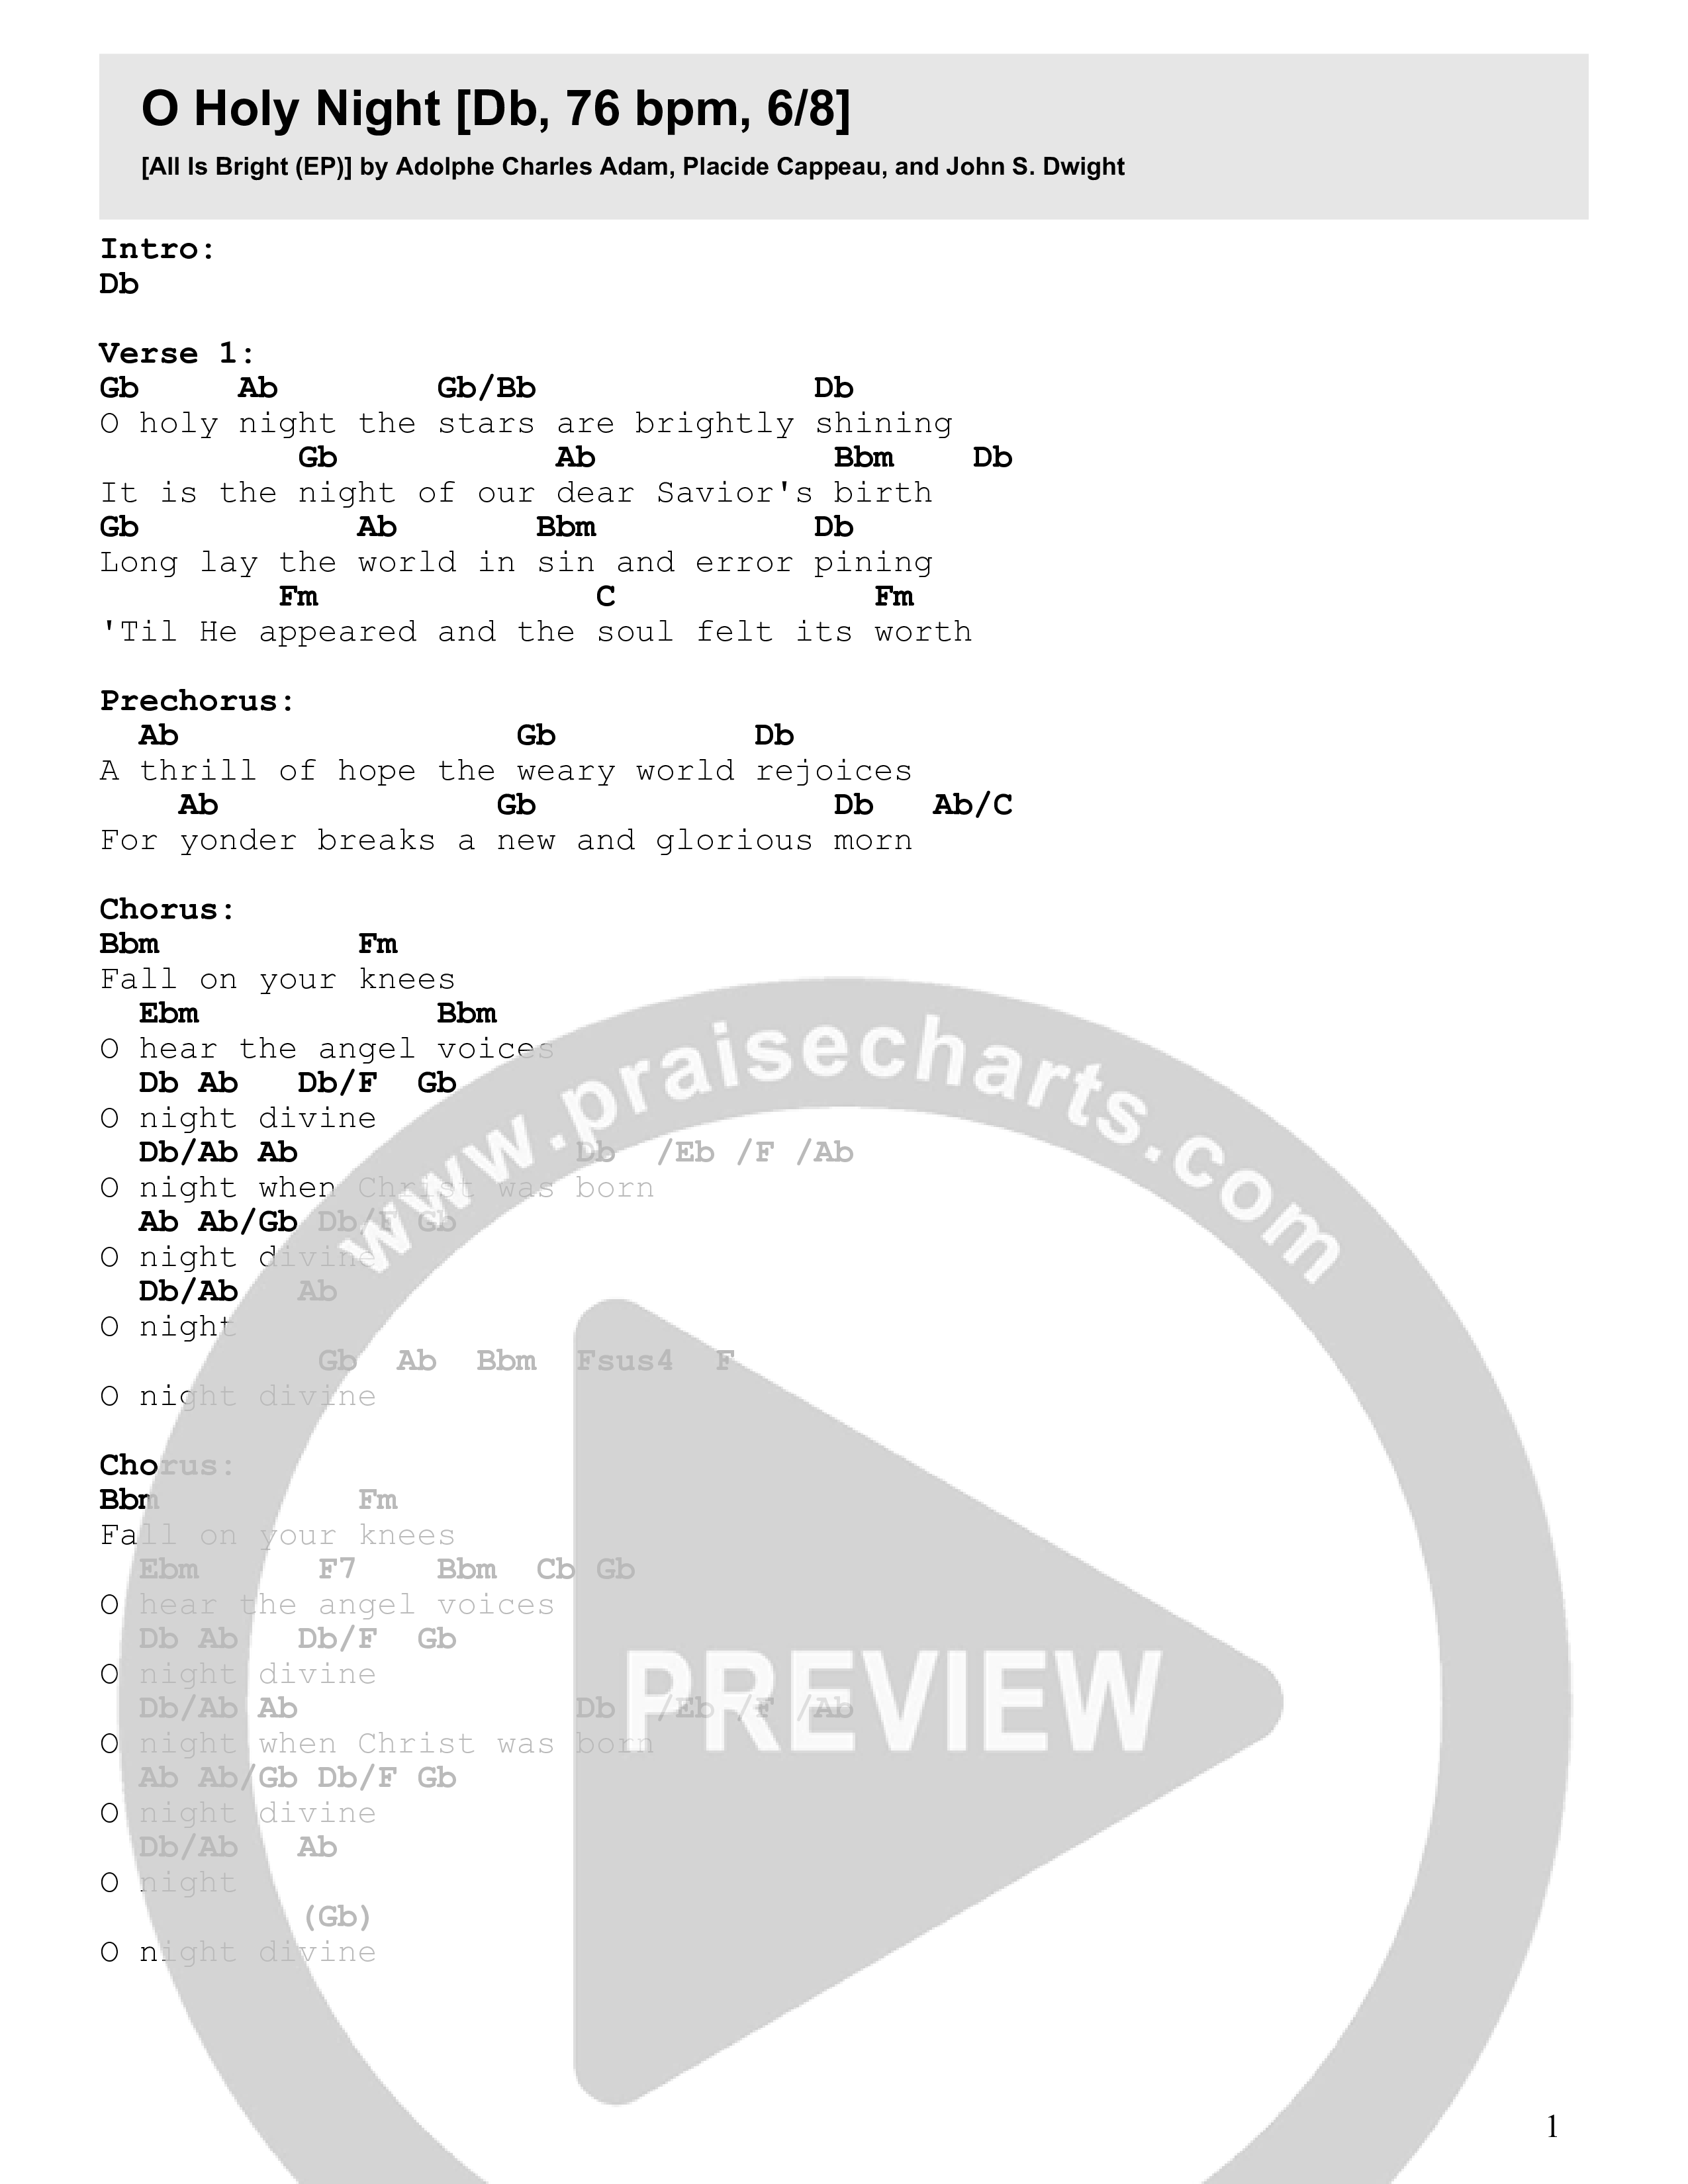 O Holy Night Chord Chart (Central Live)